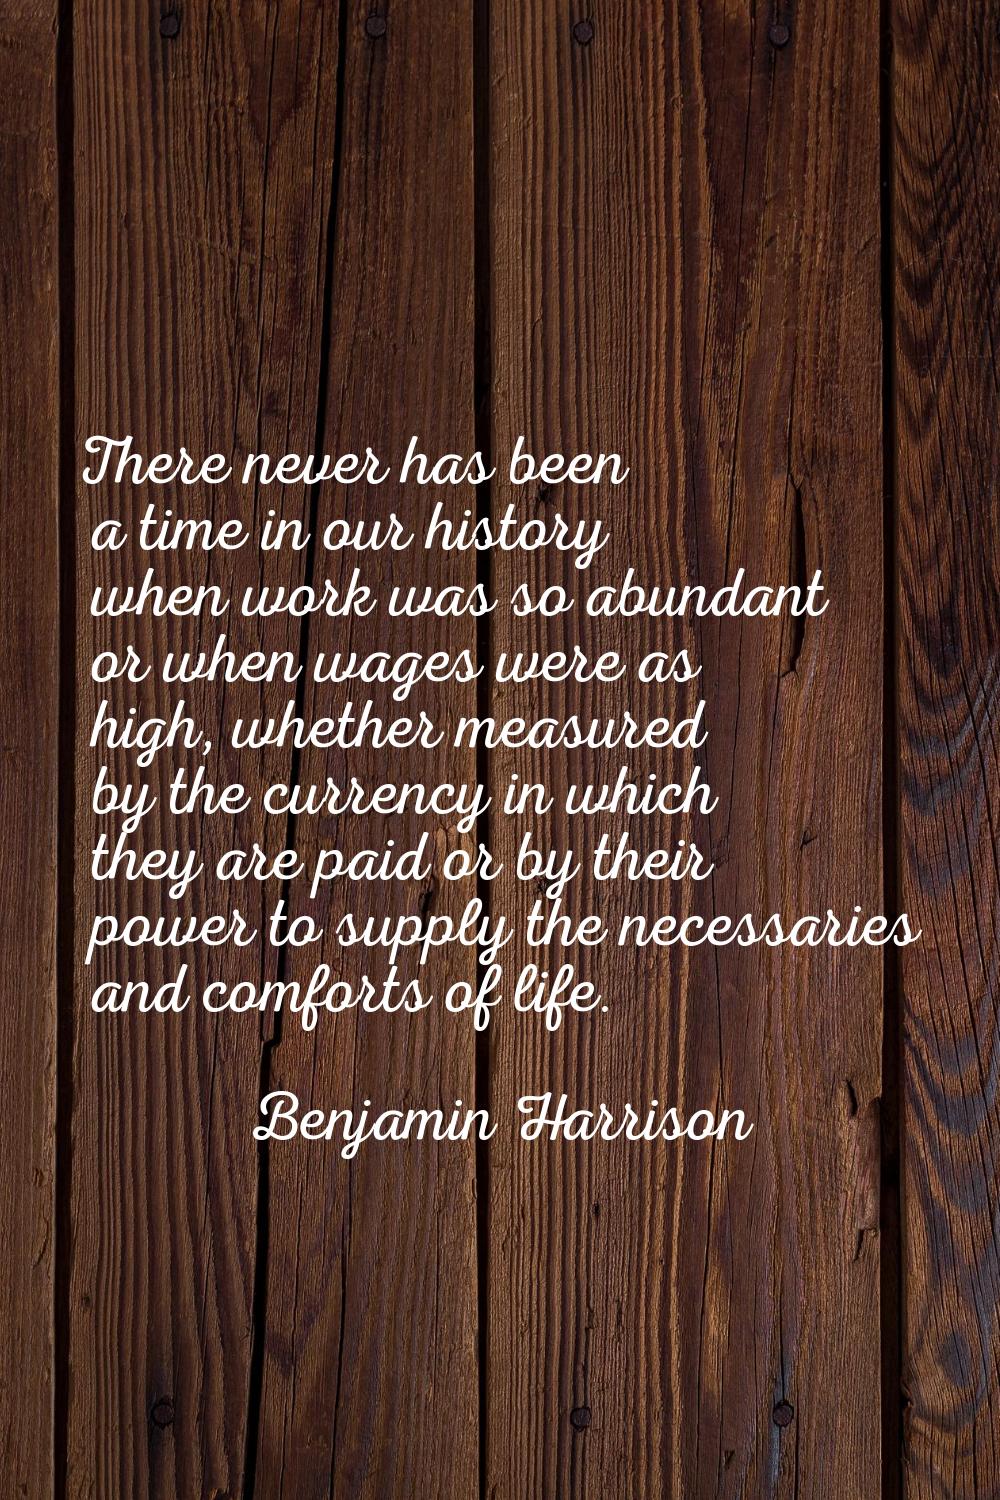 There never has been a time in our history when work was so abundant or when wages were as high, wh